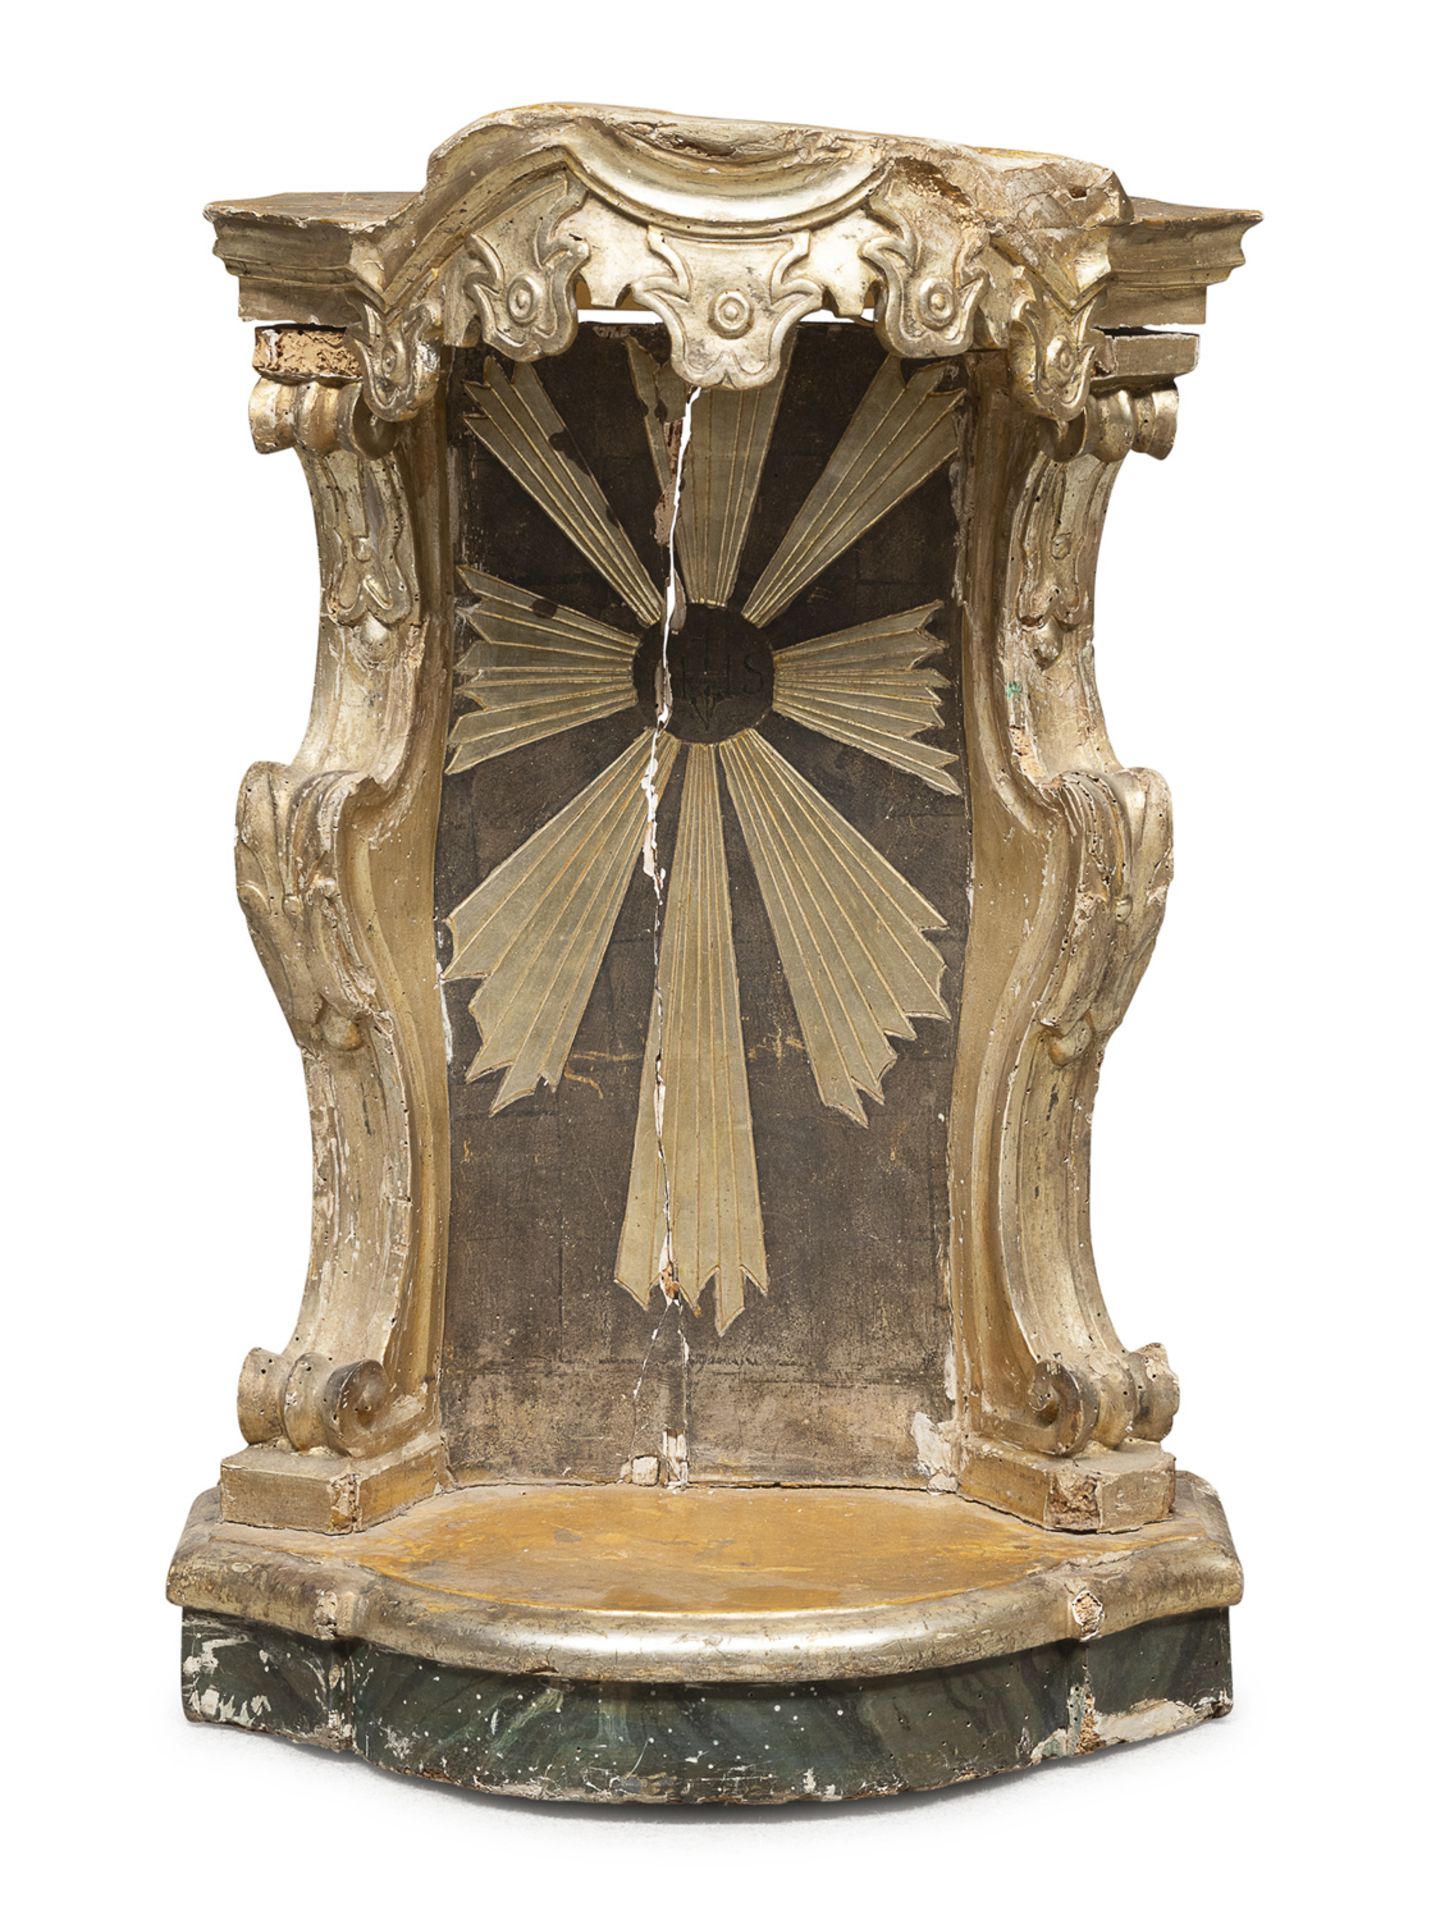 SMALL ALTAR IN GILTWOOD ELEMENTS OF THE 18TH CENTURY